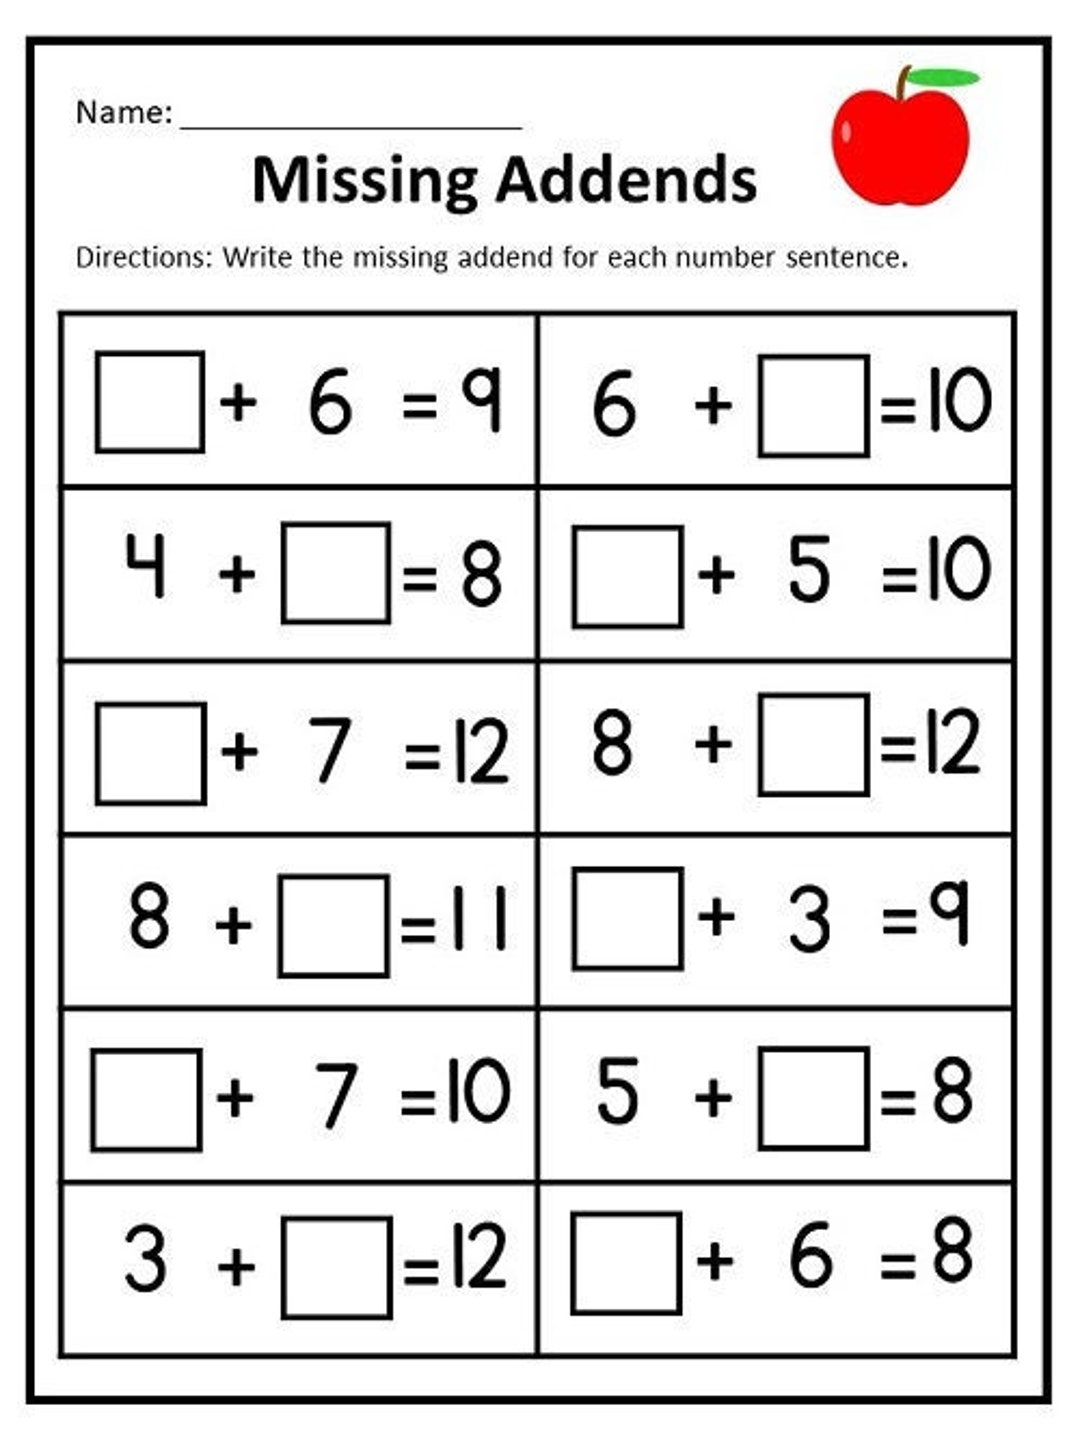 10-printable-missing-addends-worksheets-numbers-1-20-for-etsy-new-zealand